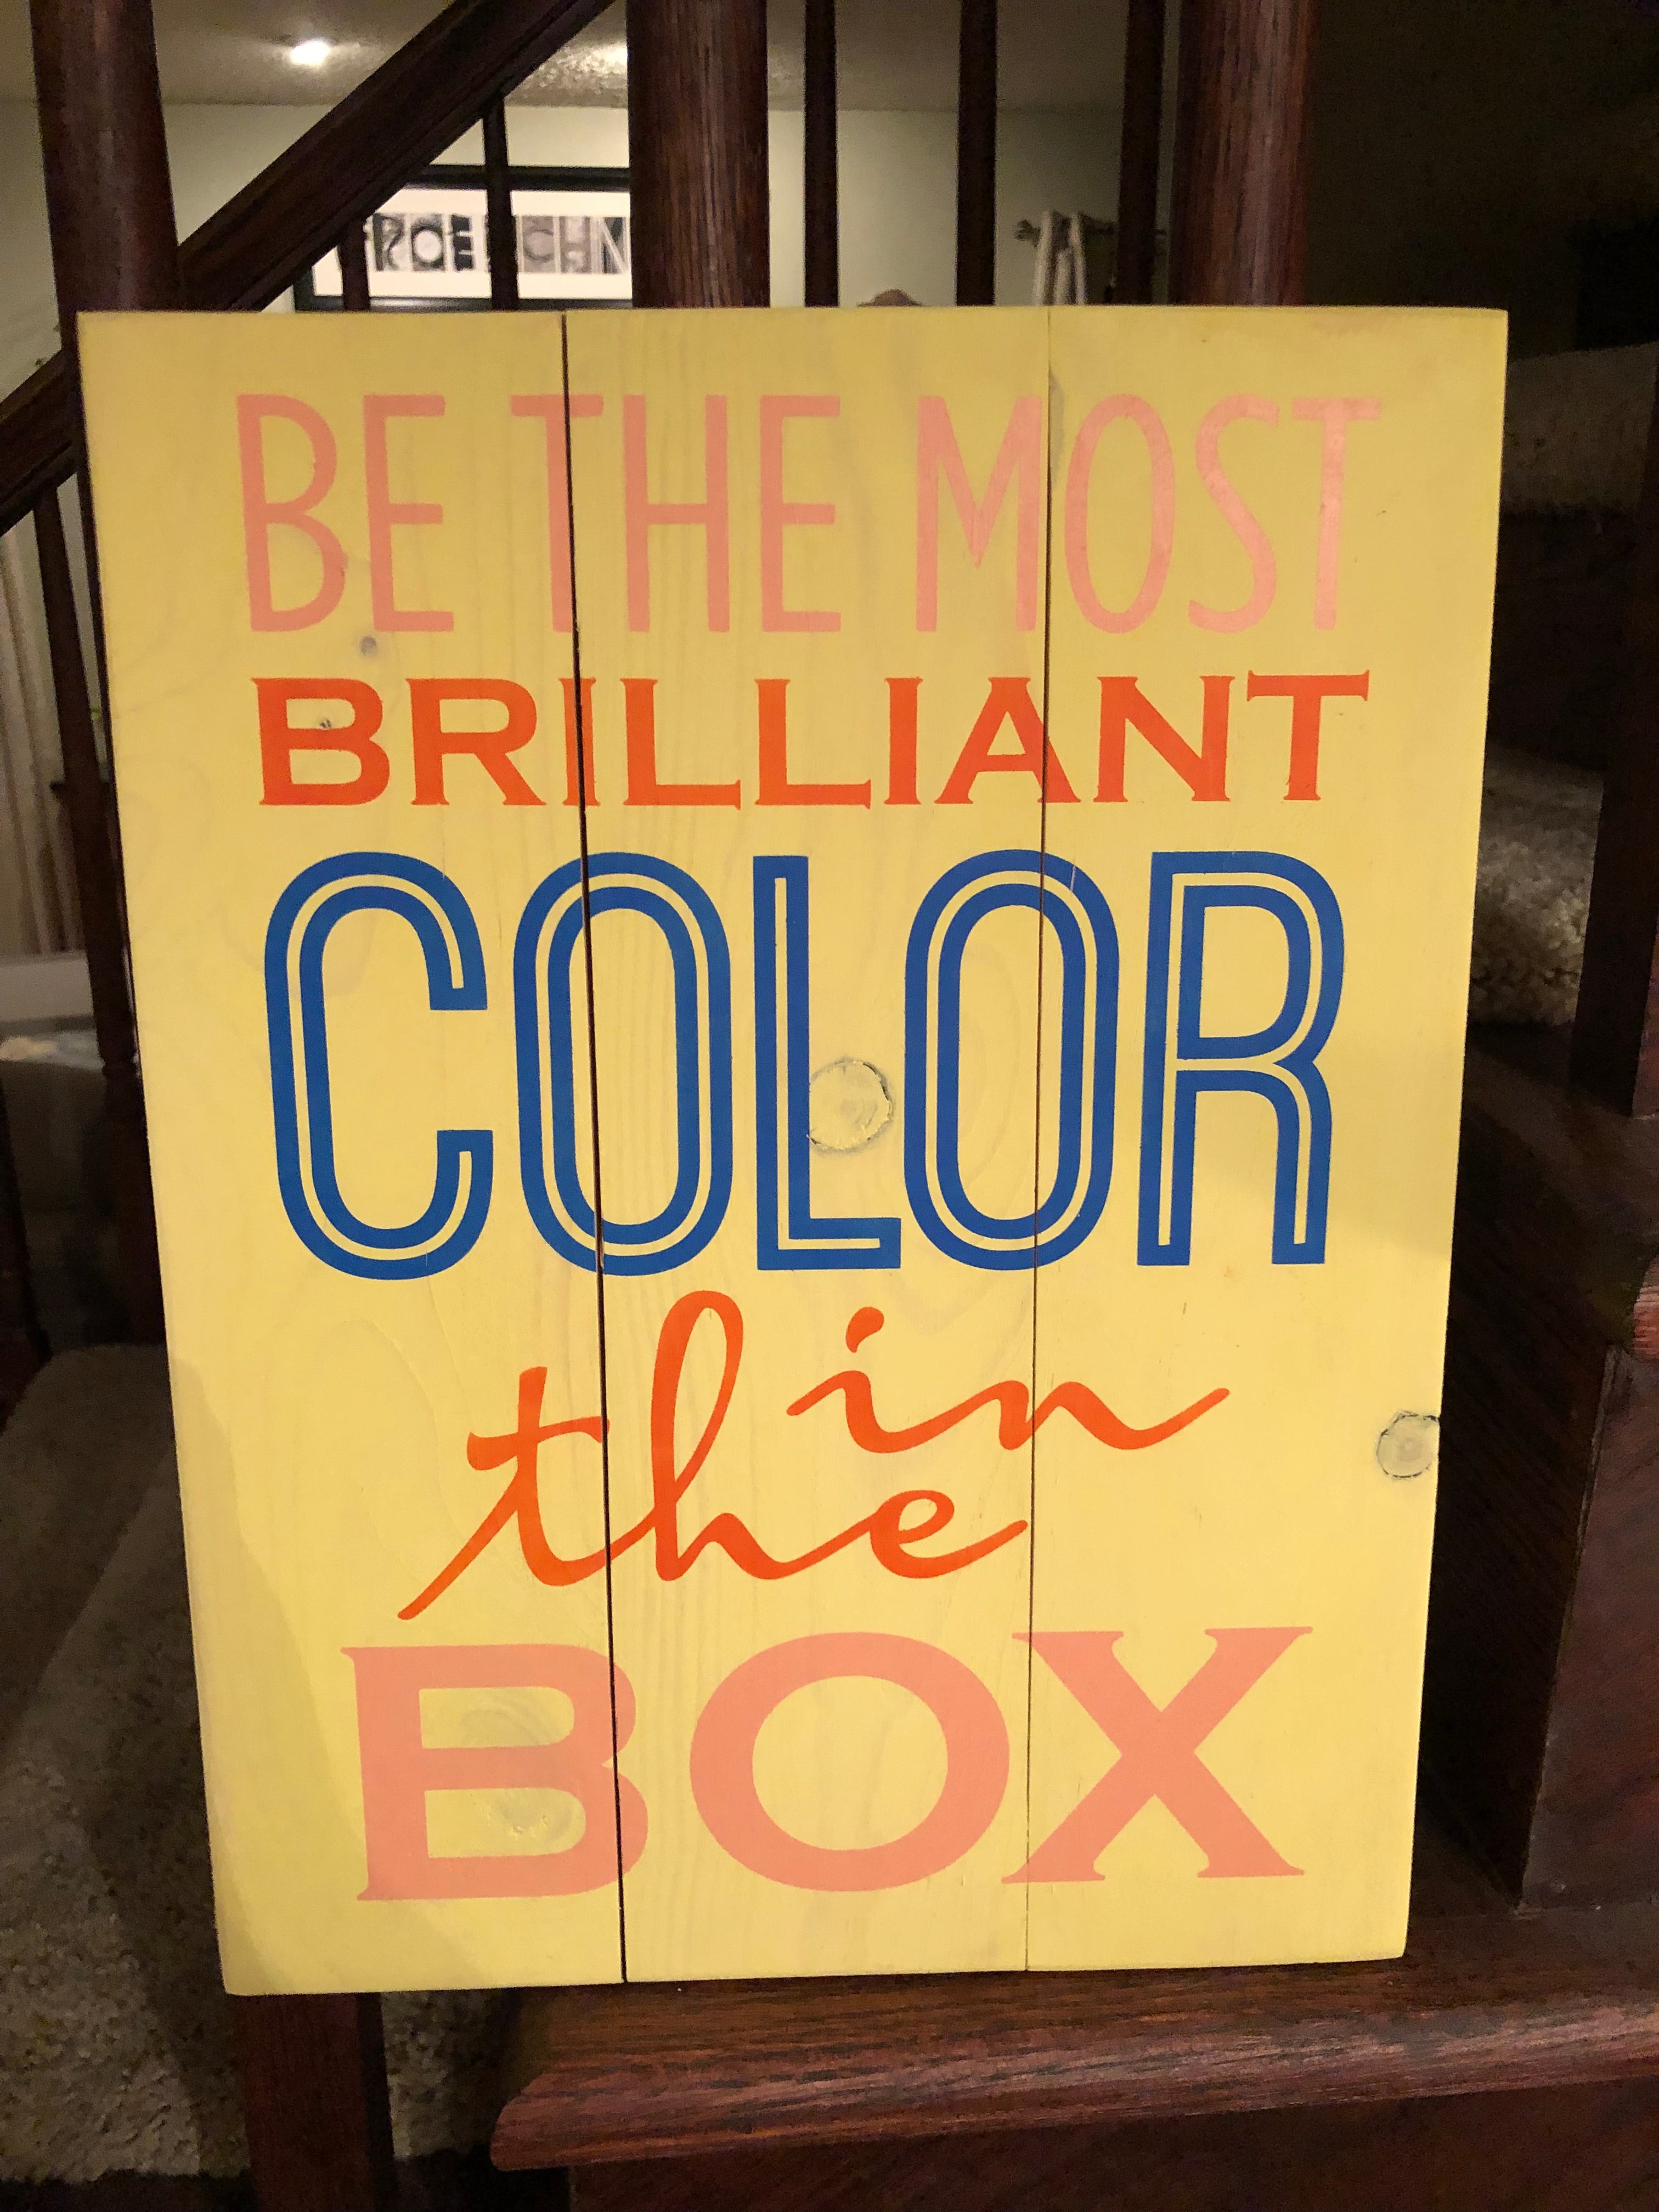 Be the most brilliant color in the box